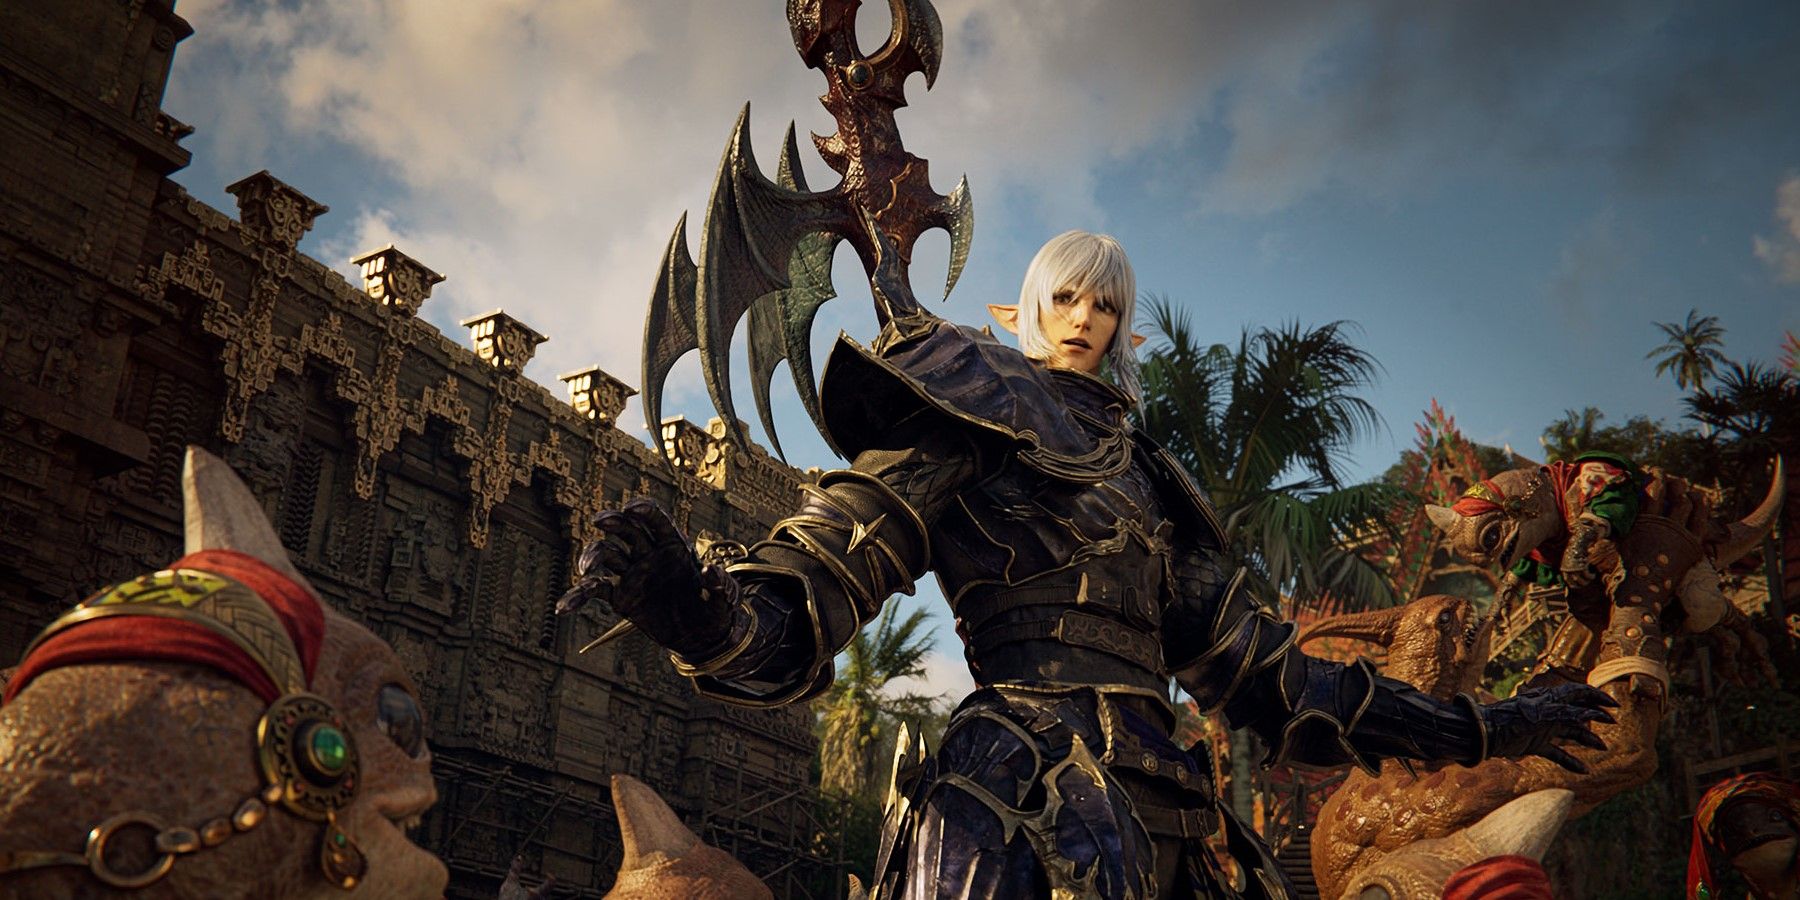 Final Fantasy 14 Dev Wants To Make The Game More Challenging